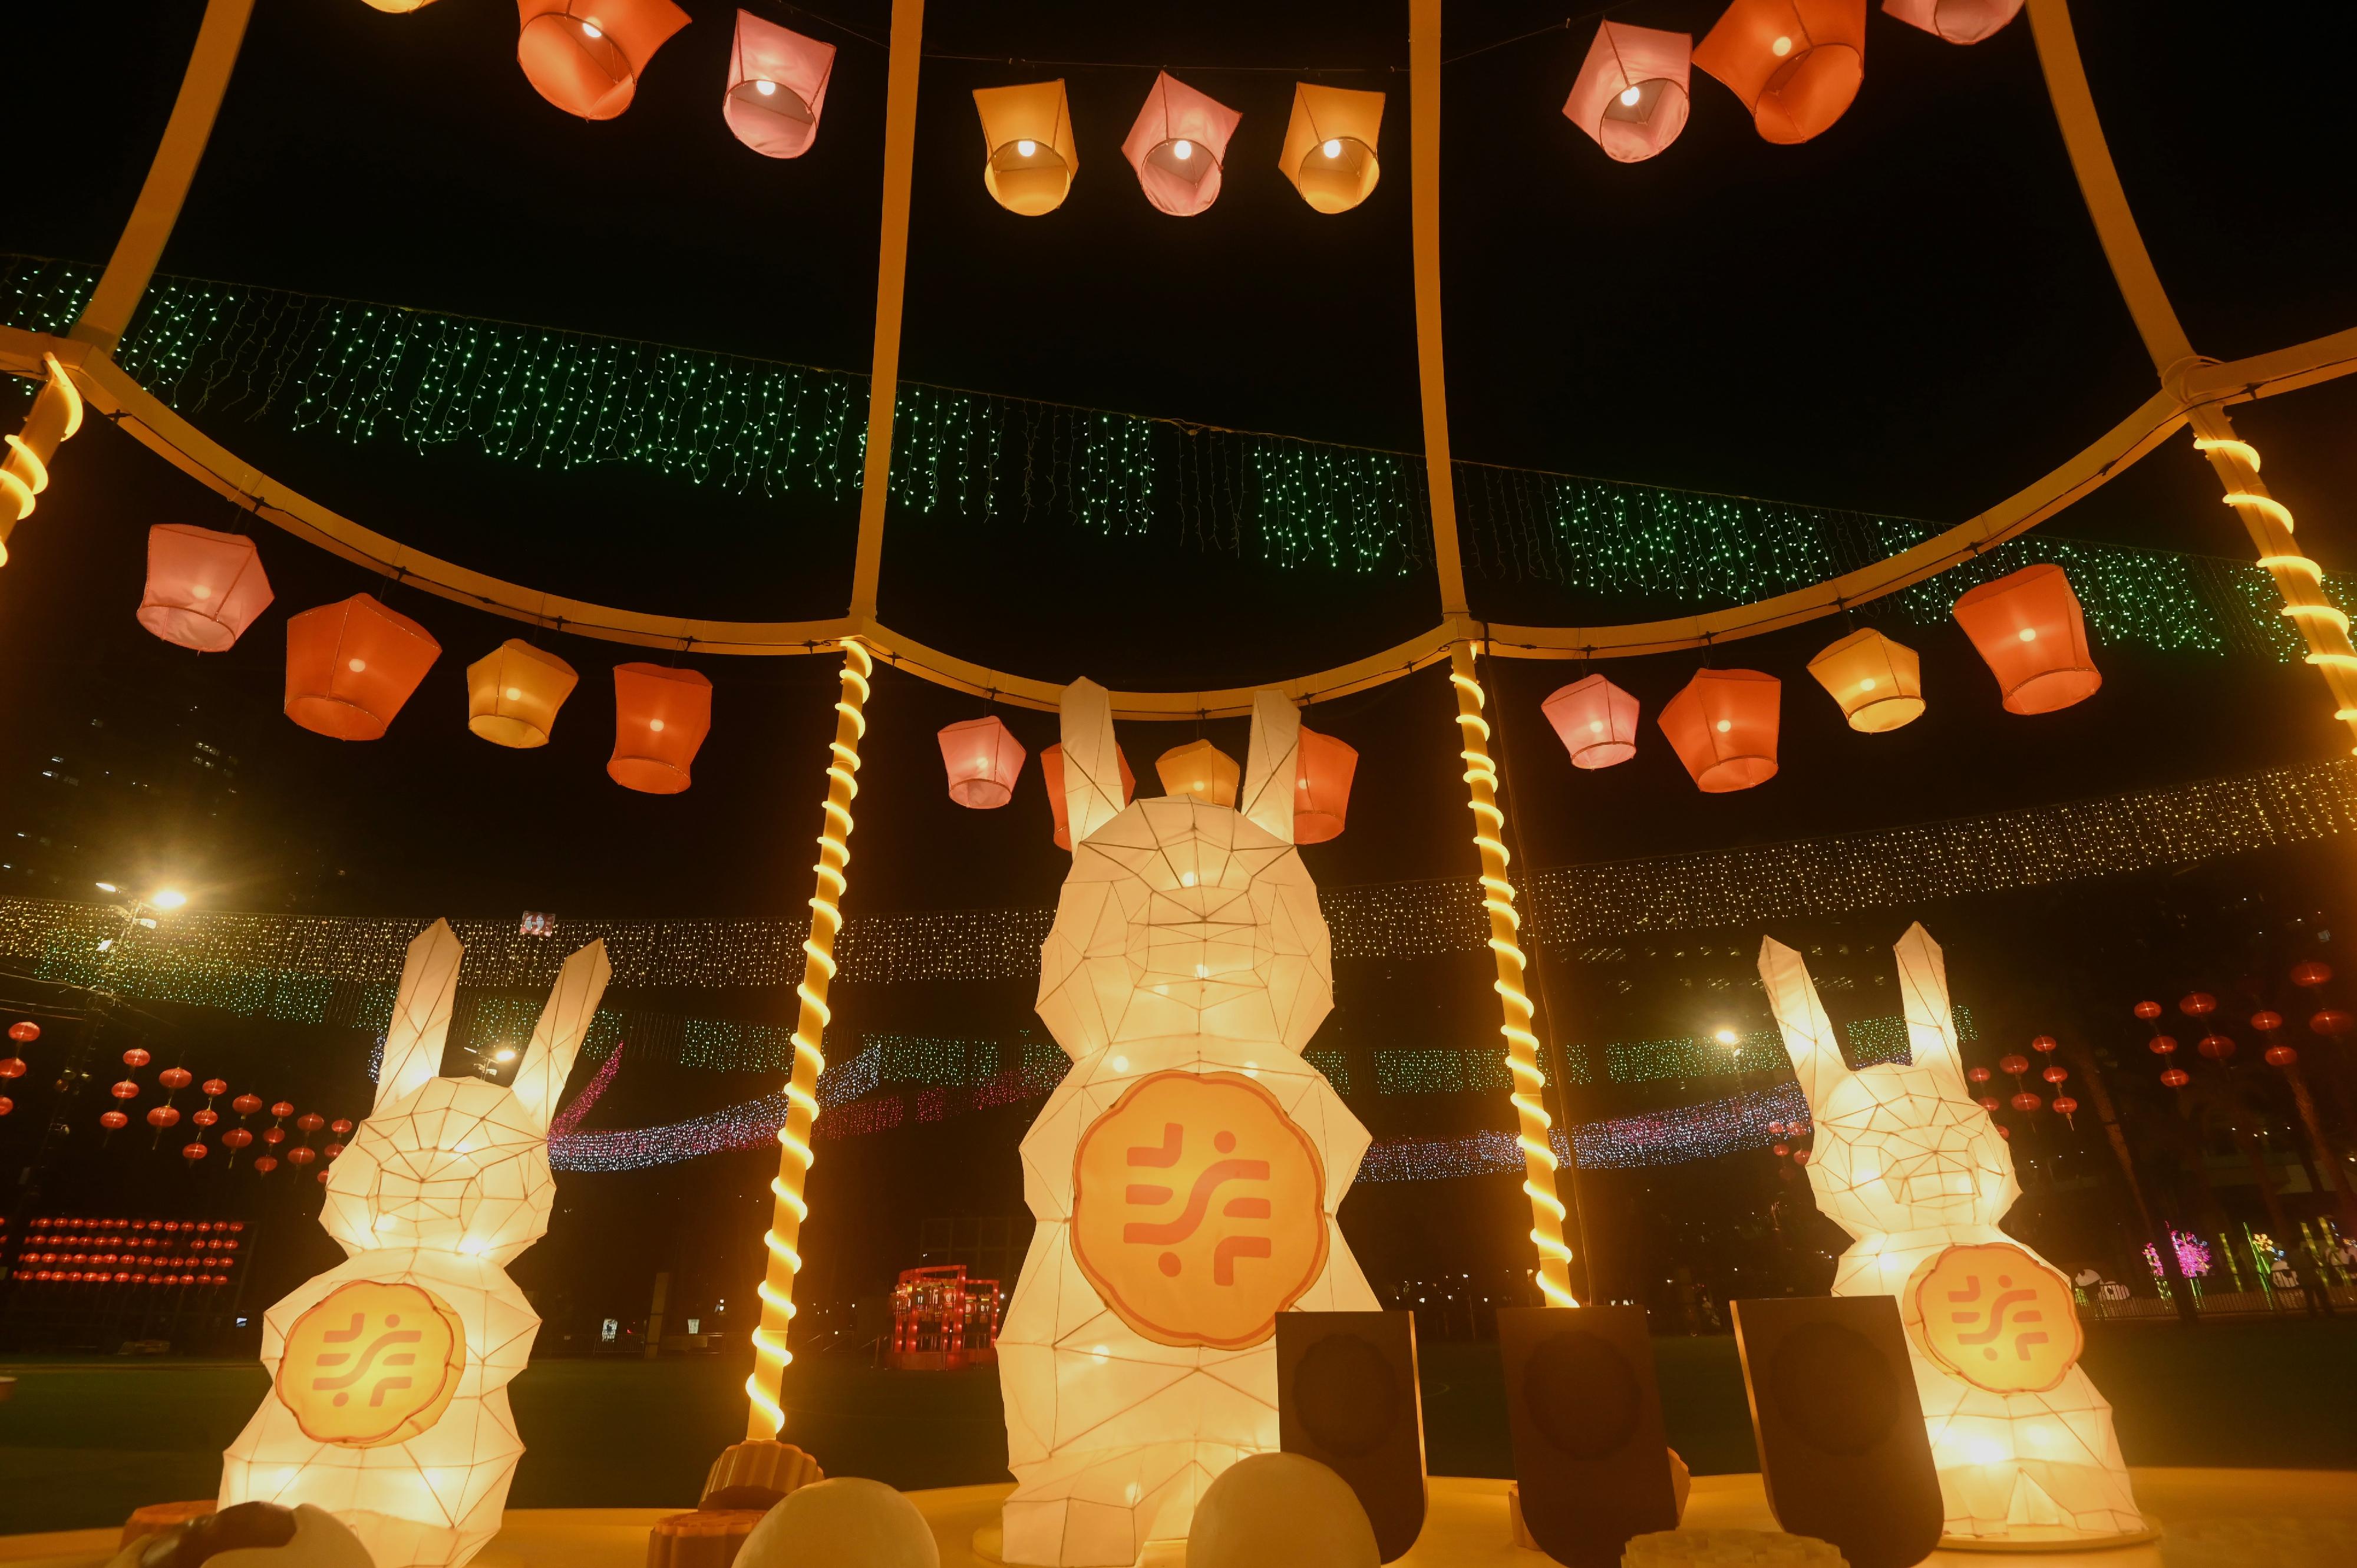 The Leisure and Cultural Services Department will showcase spectacular lantern displays of different themes at the Mid-Autumn Lantern Carnivals in Victoria Park, Sha Tin Park and Tuen Mun Park from tomorrow (September 23) until October 2. A vast range of activities will also be organised in the three parks at different dates. Photo shows the lantern entitled "Chasing the Bunnies Under the Moonlit Lanterns" crafted by local masters using traditional techniques at Victoria Park.